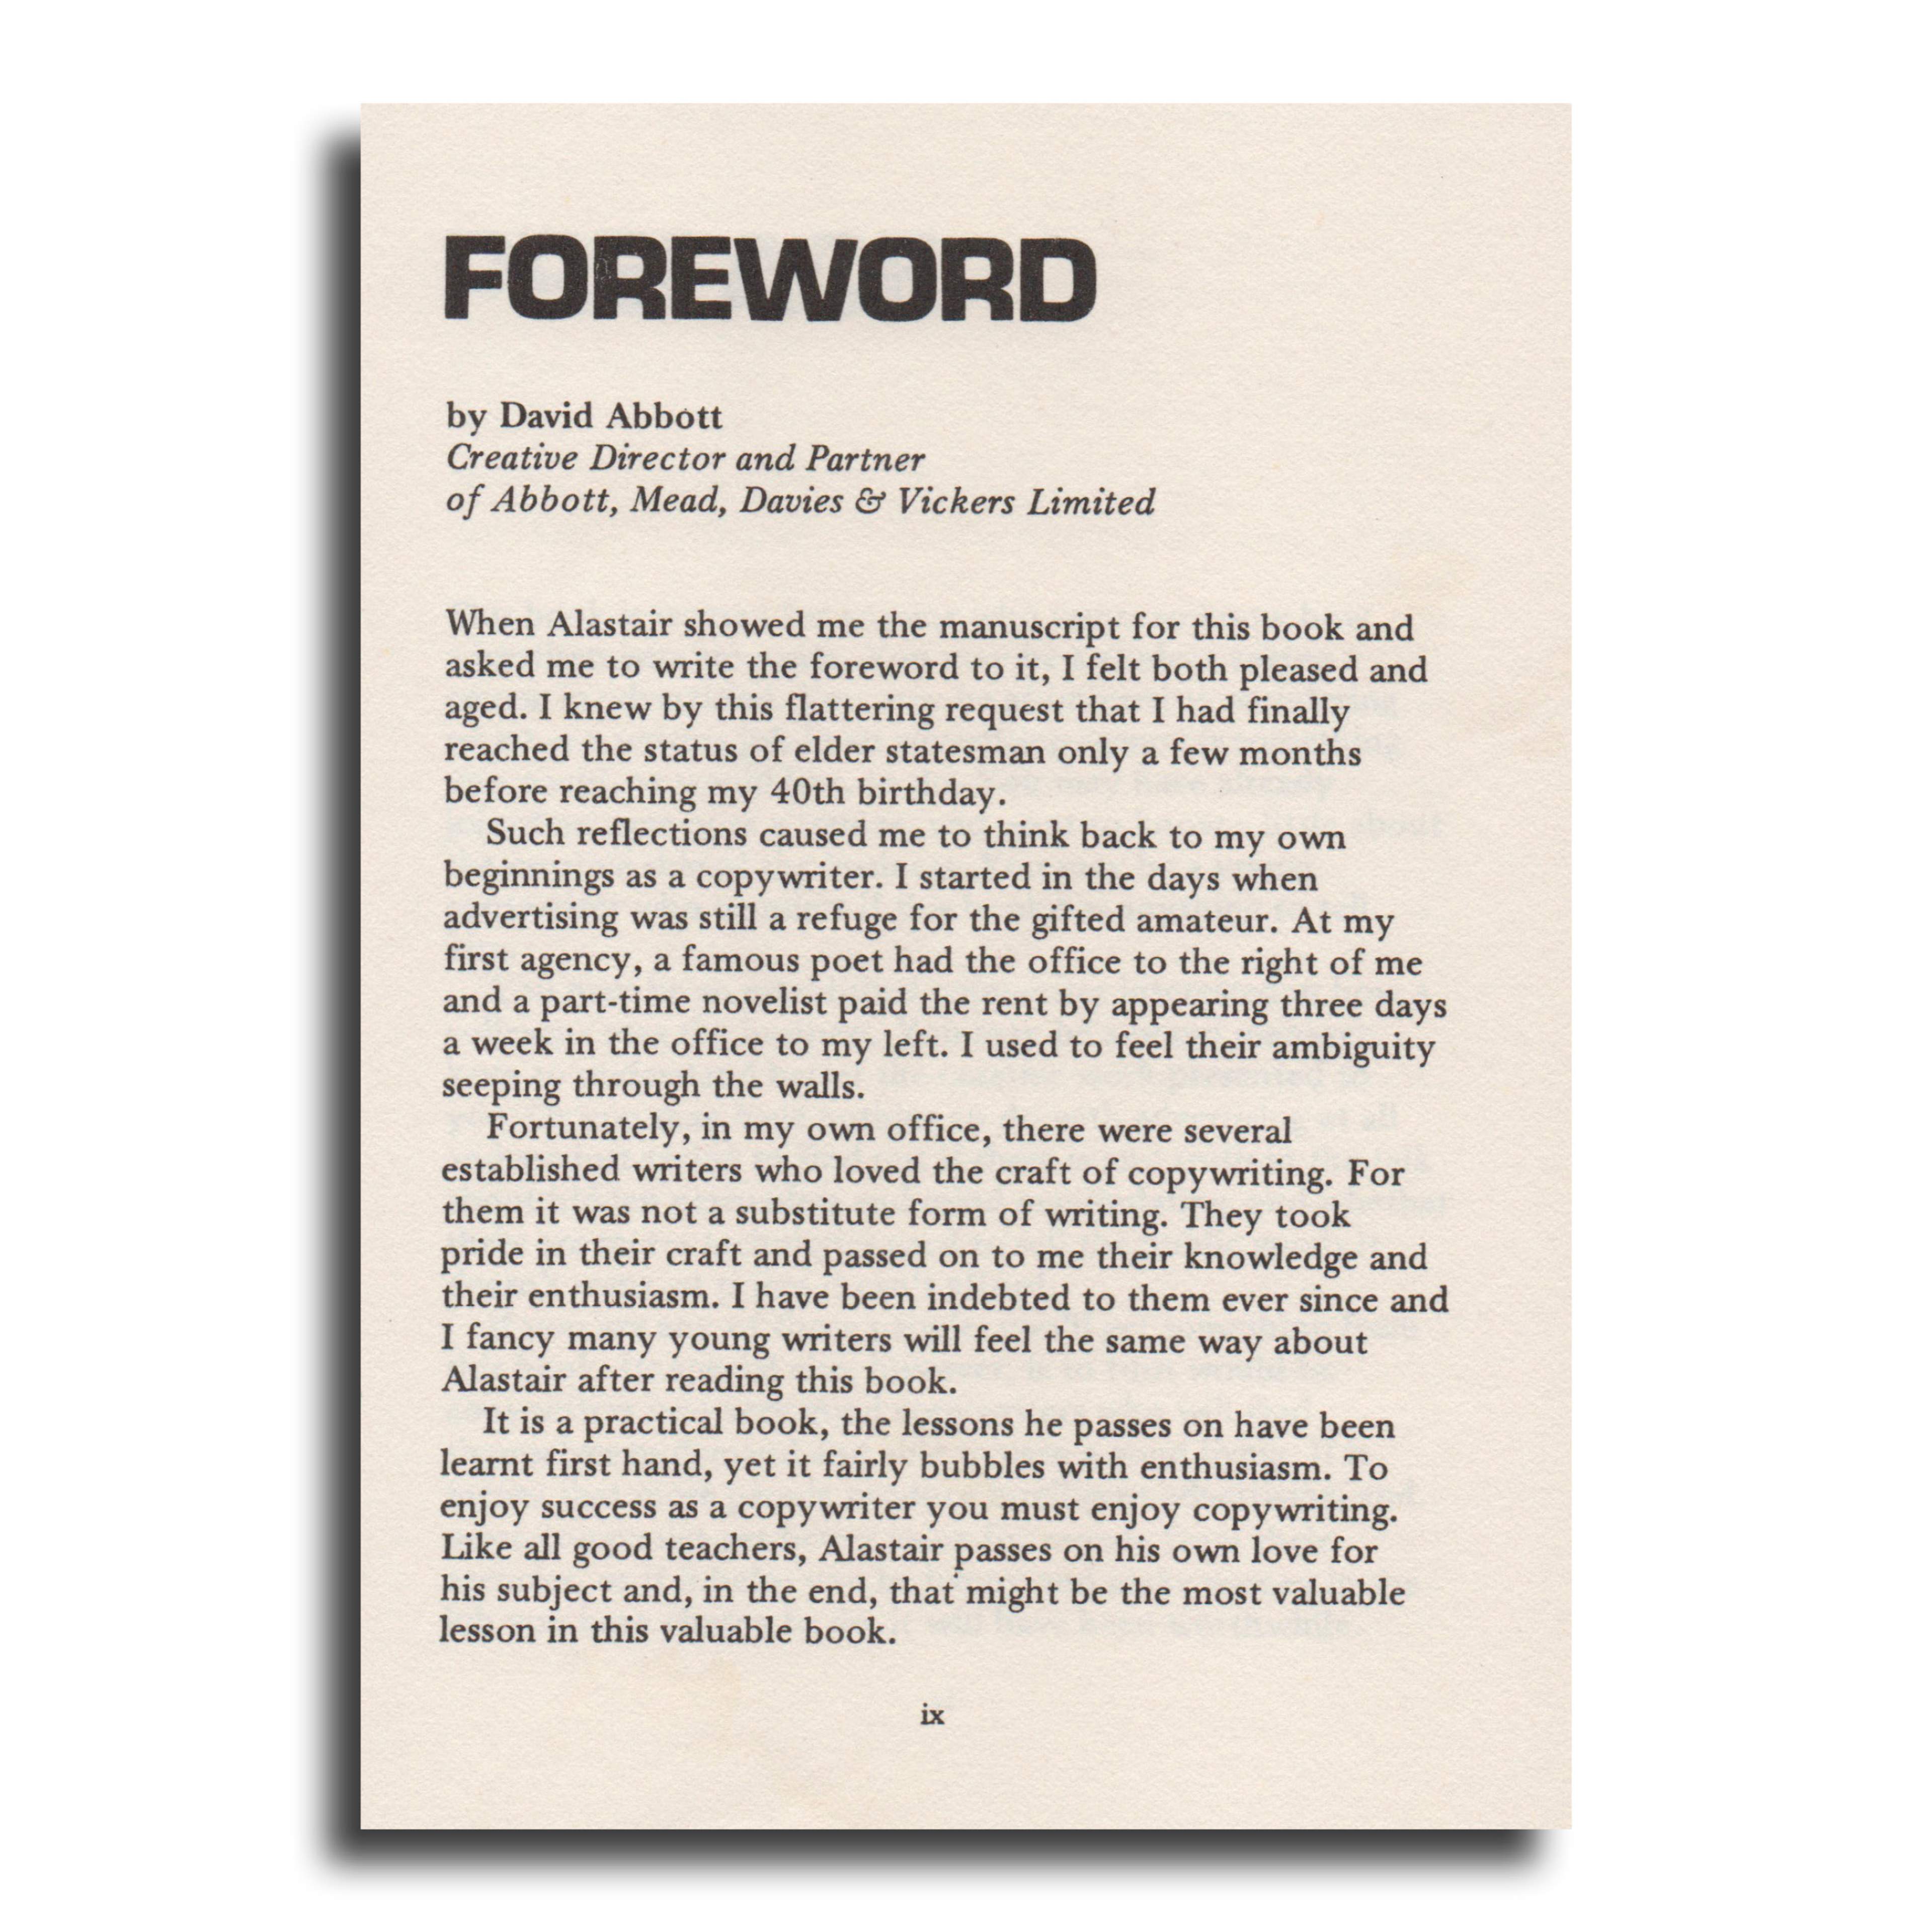 Foreword written by David Abbott for the book The Craft of Copywriting. 